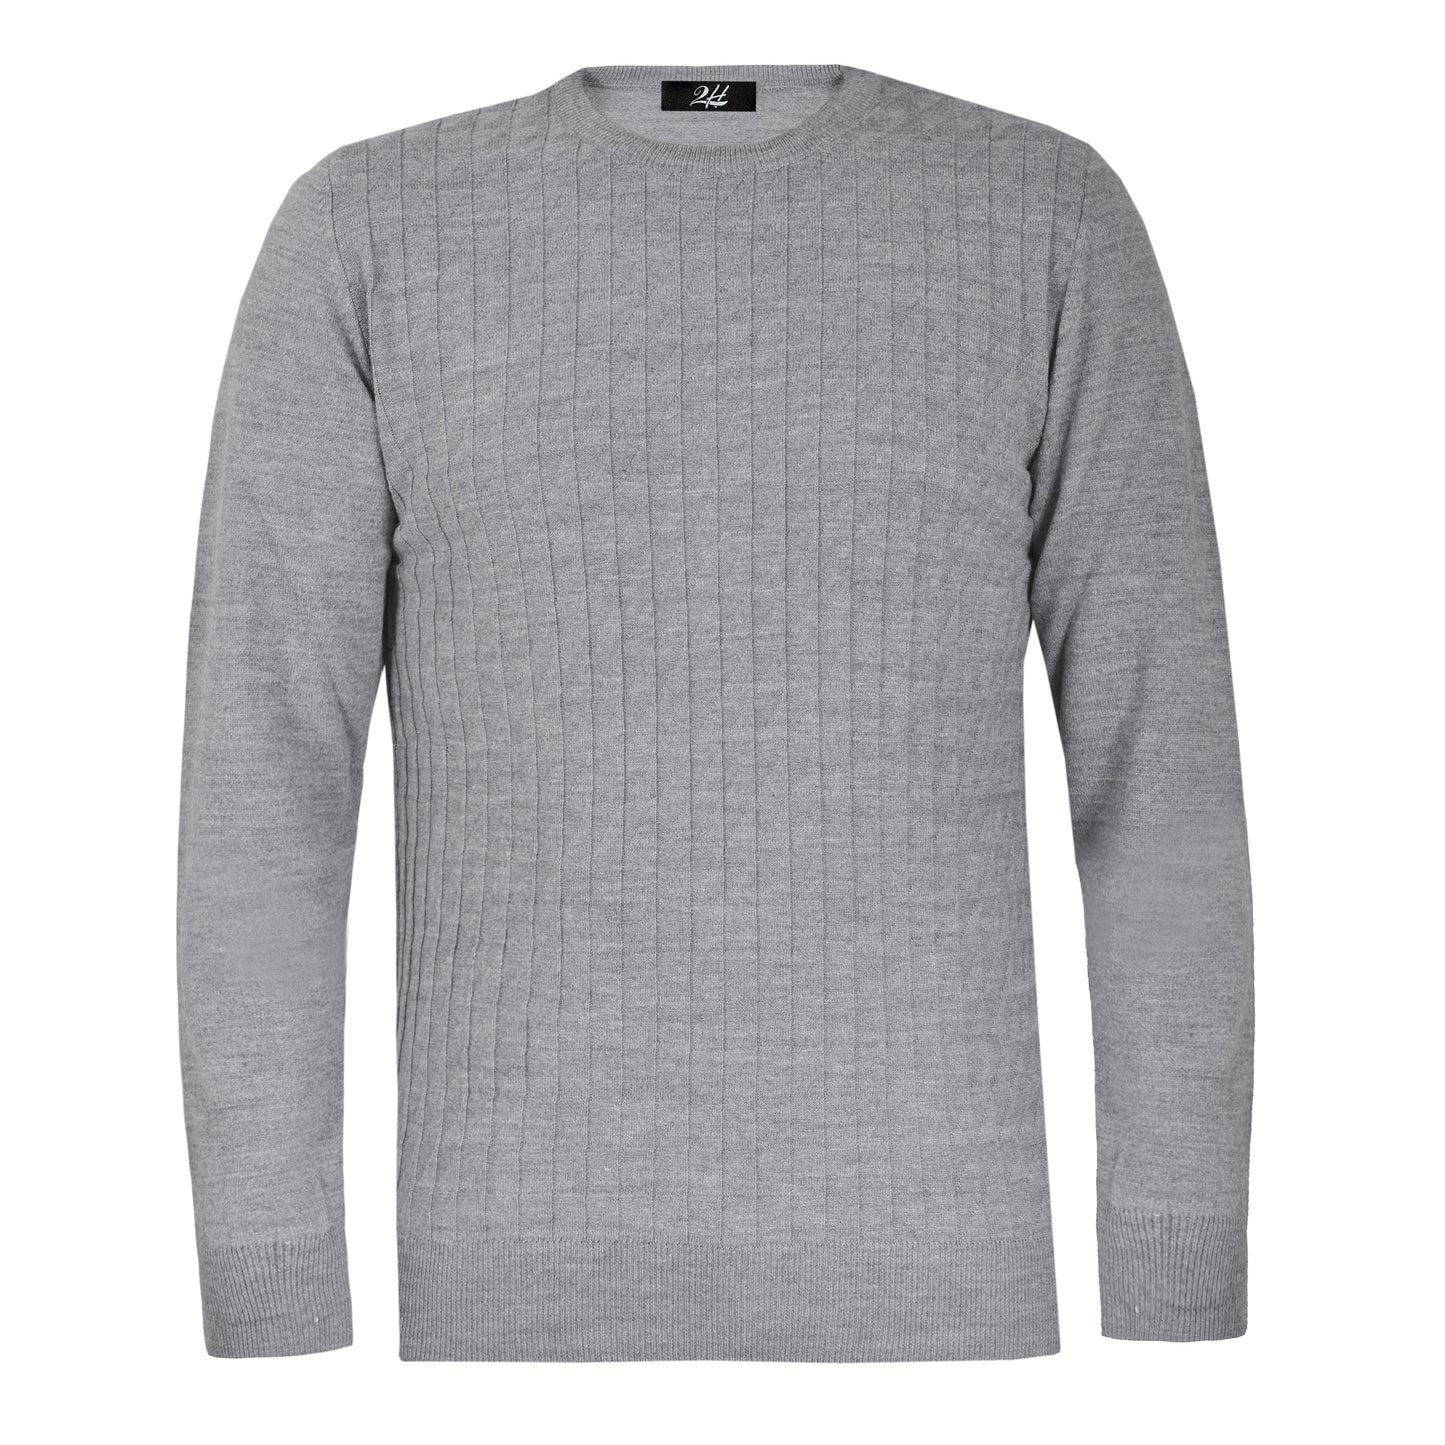 SALE! 2H Grey Small Squareds  Knitted Round Neck Sweater